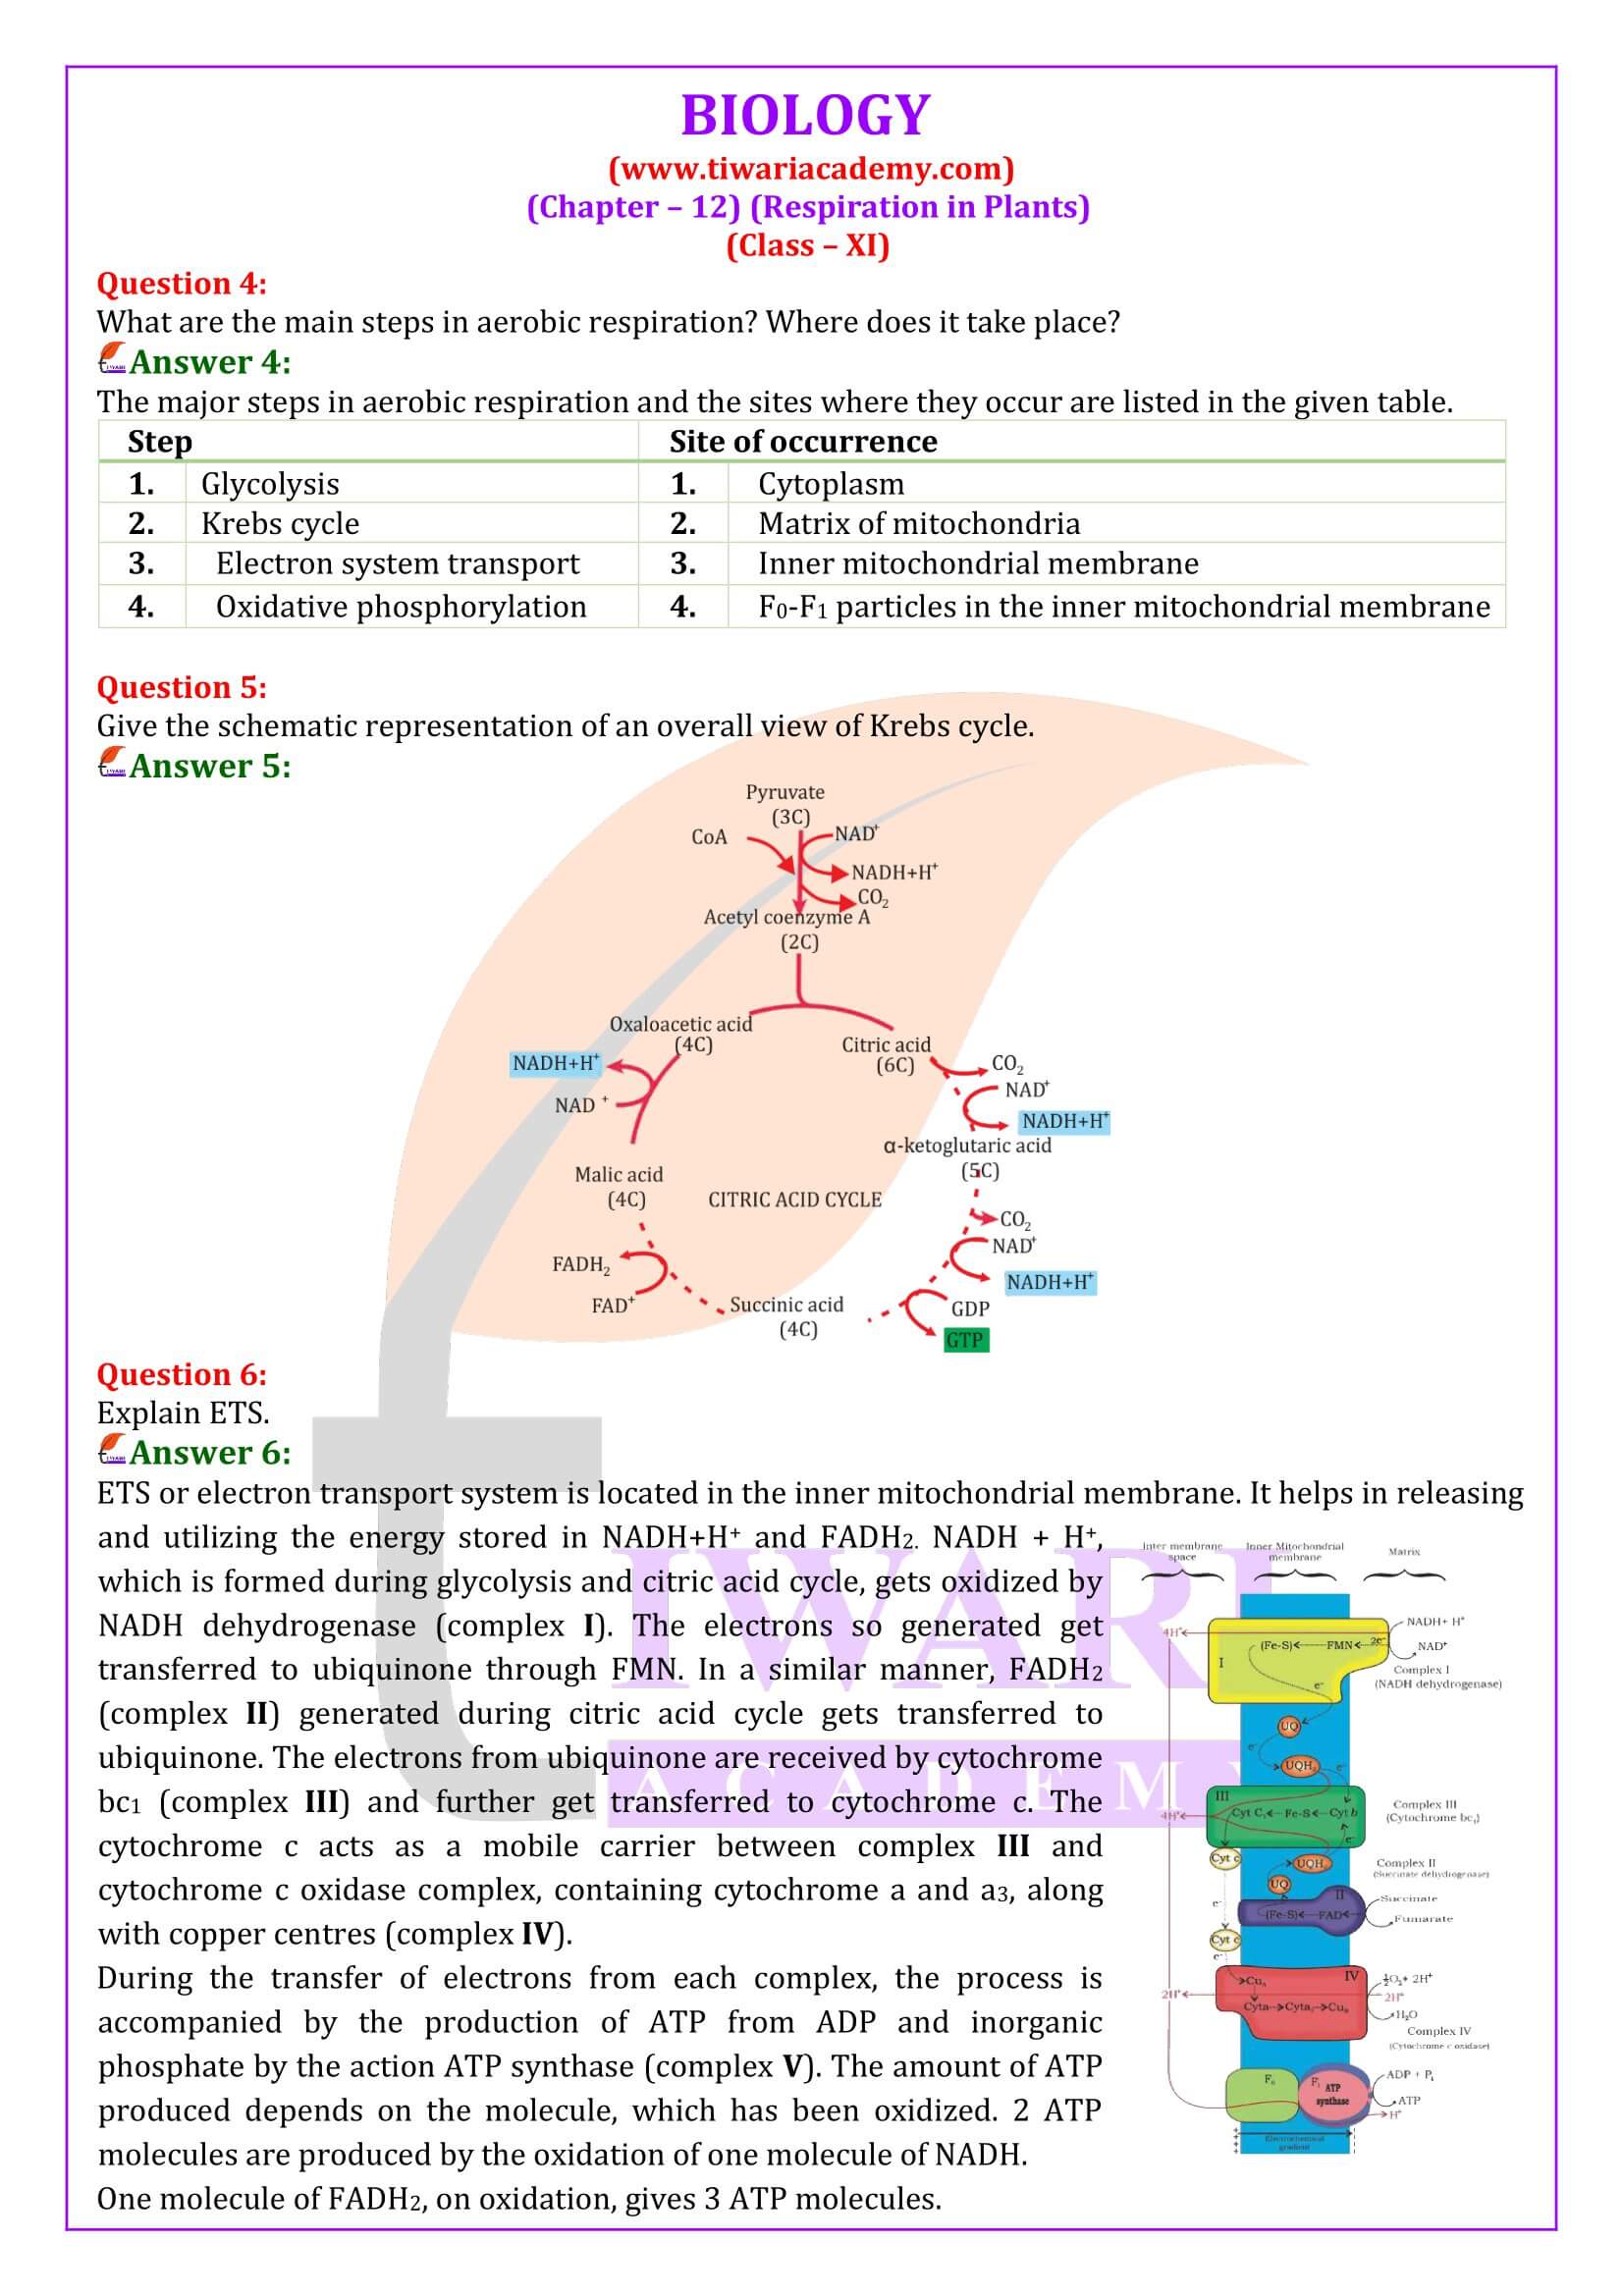 NCERT Solutions for Class 11 Biology Chapter 12 in English Medium